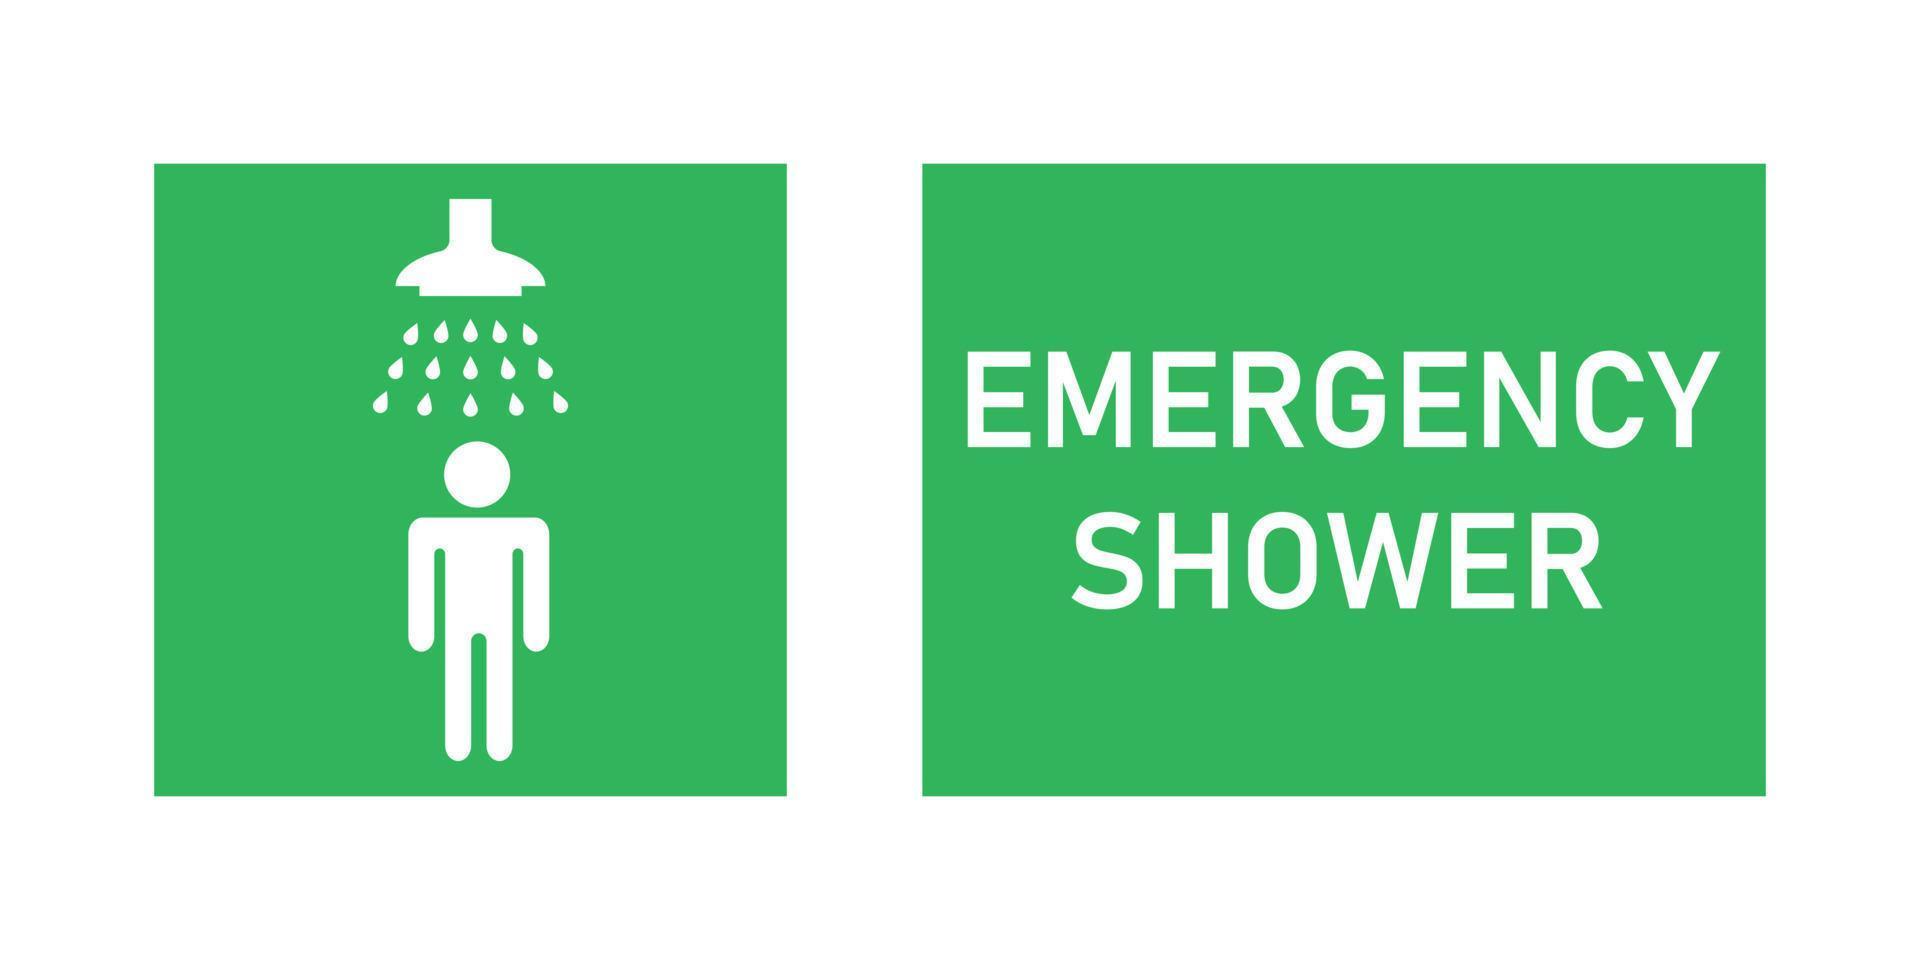 Emergency shower label. Healthy protect icon. Vector